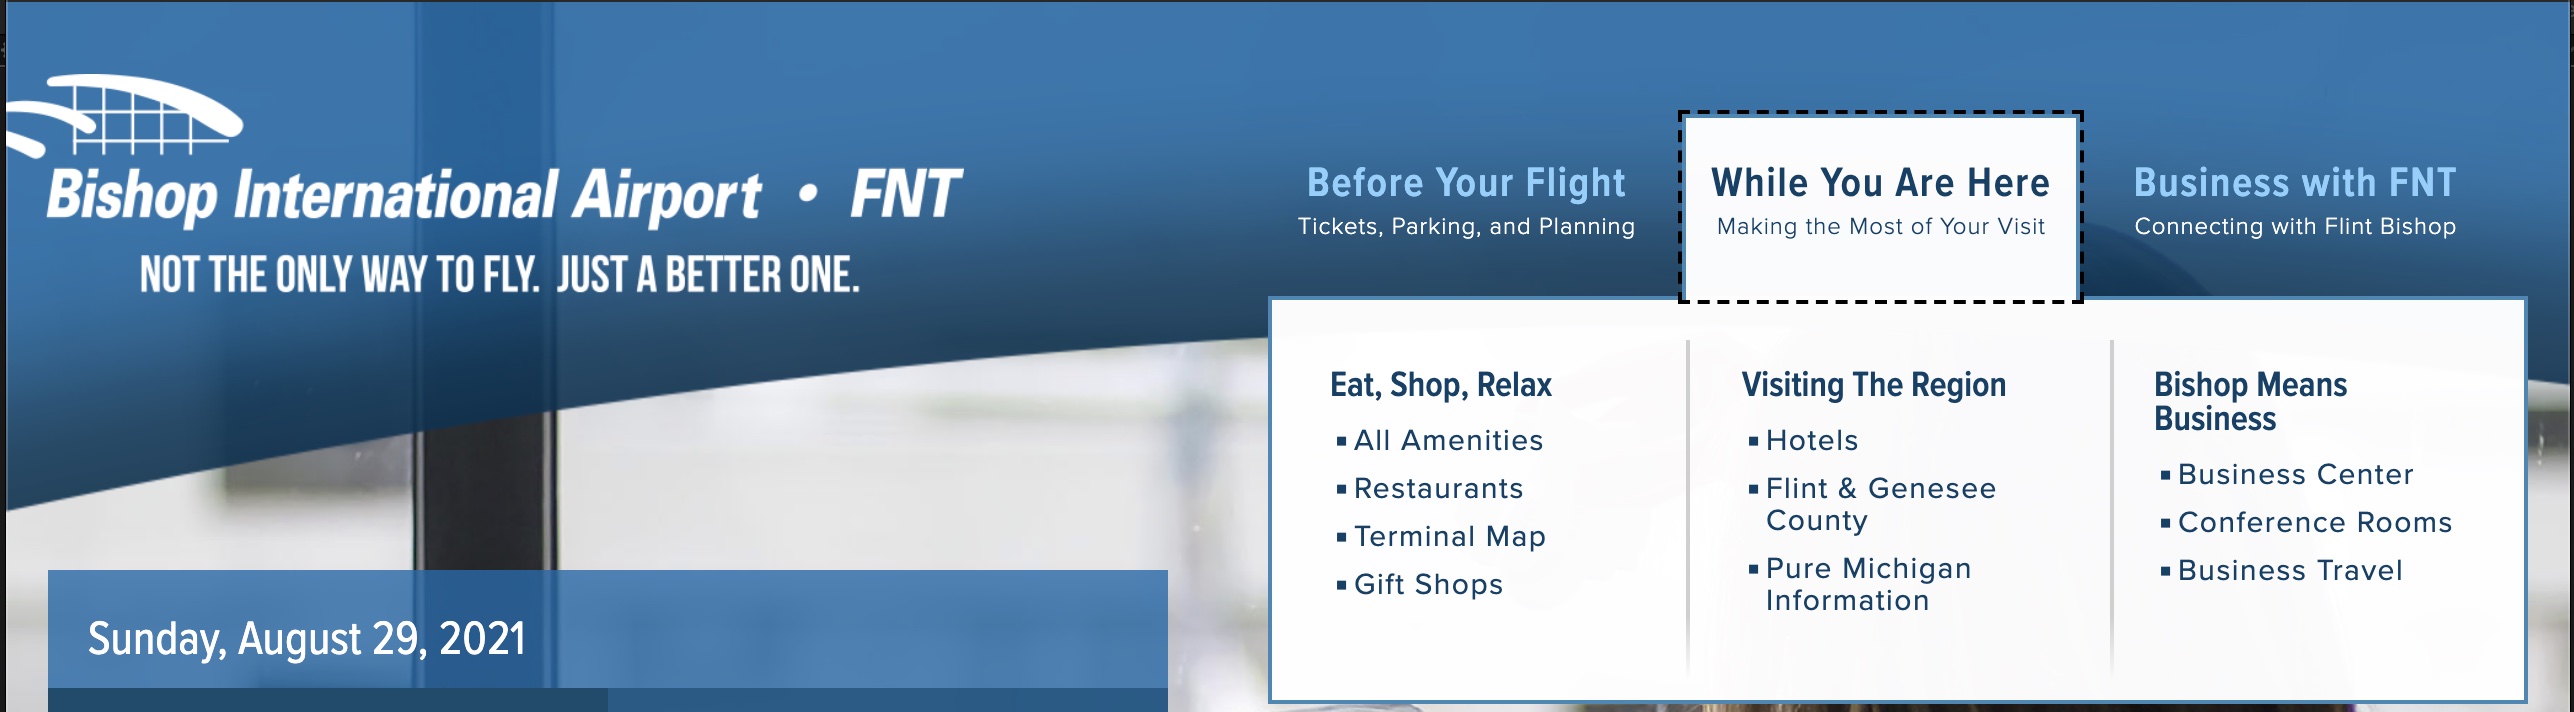 preview of the FNT airport multi-tiered navigation